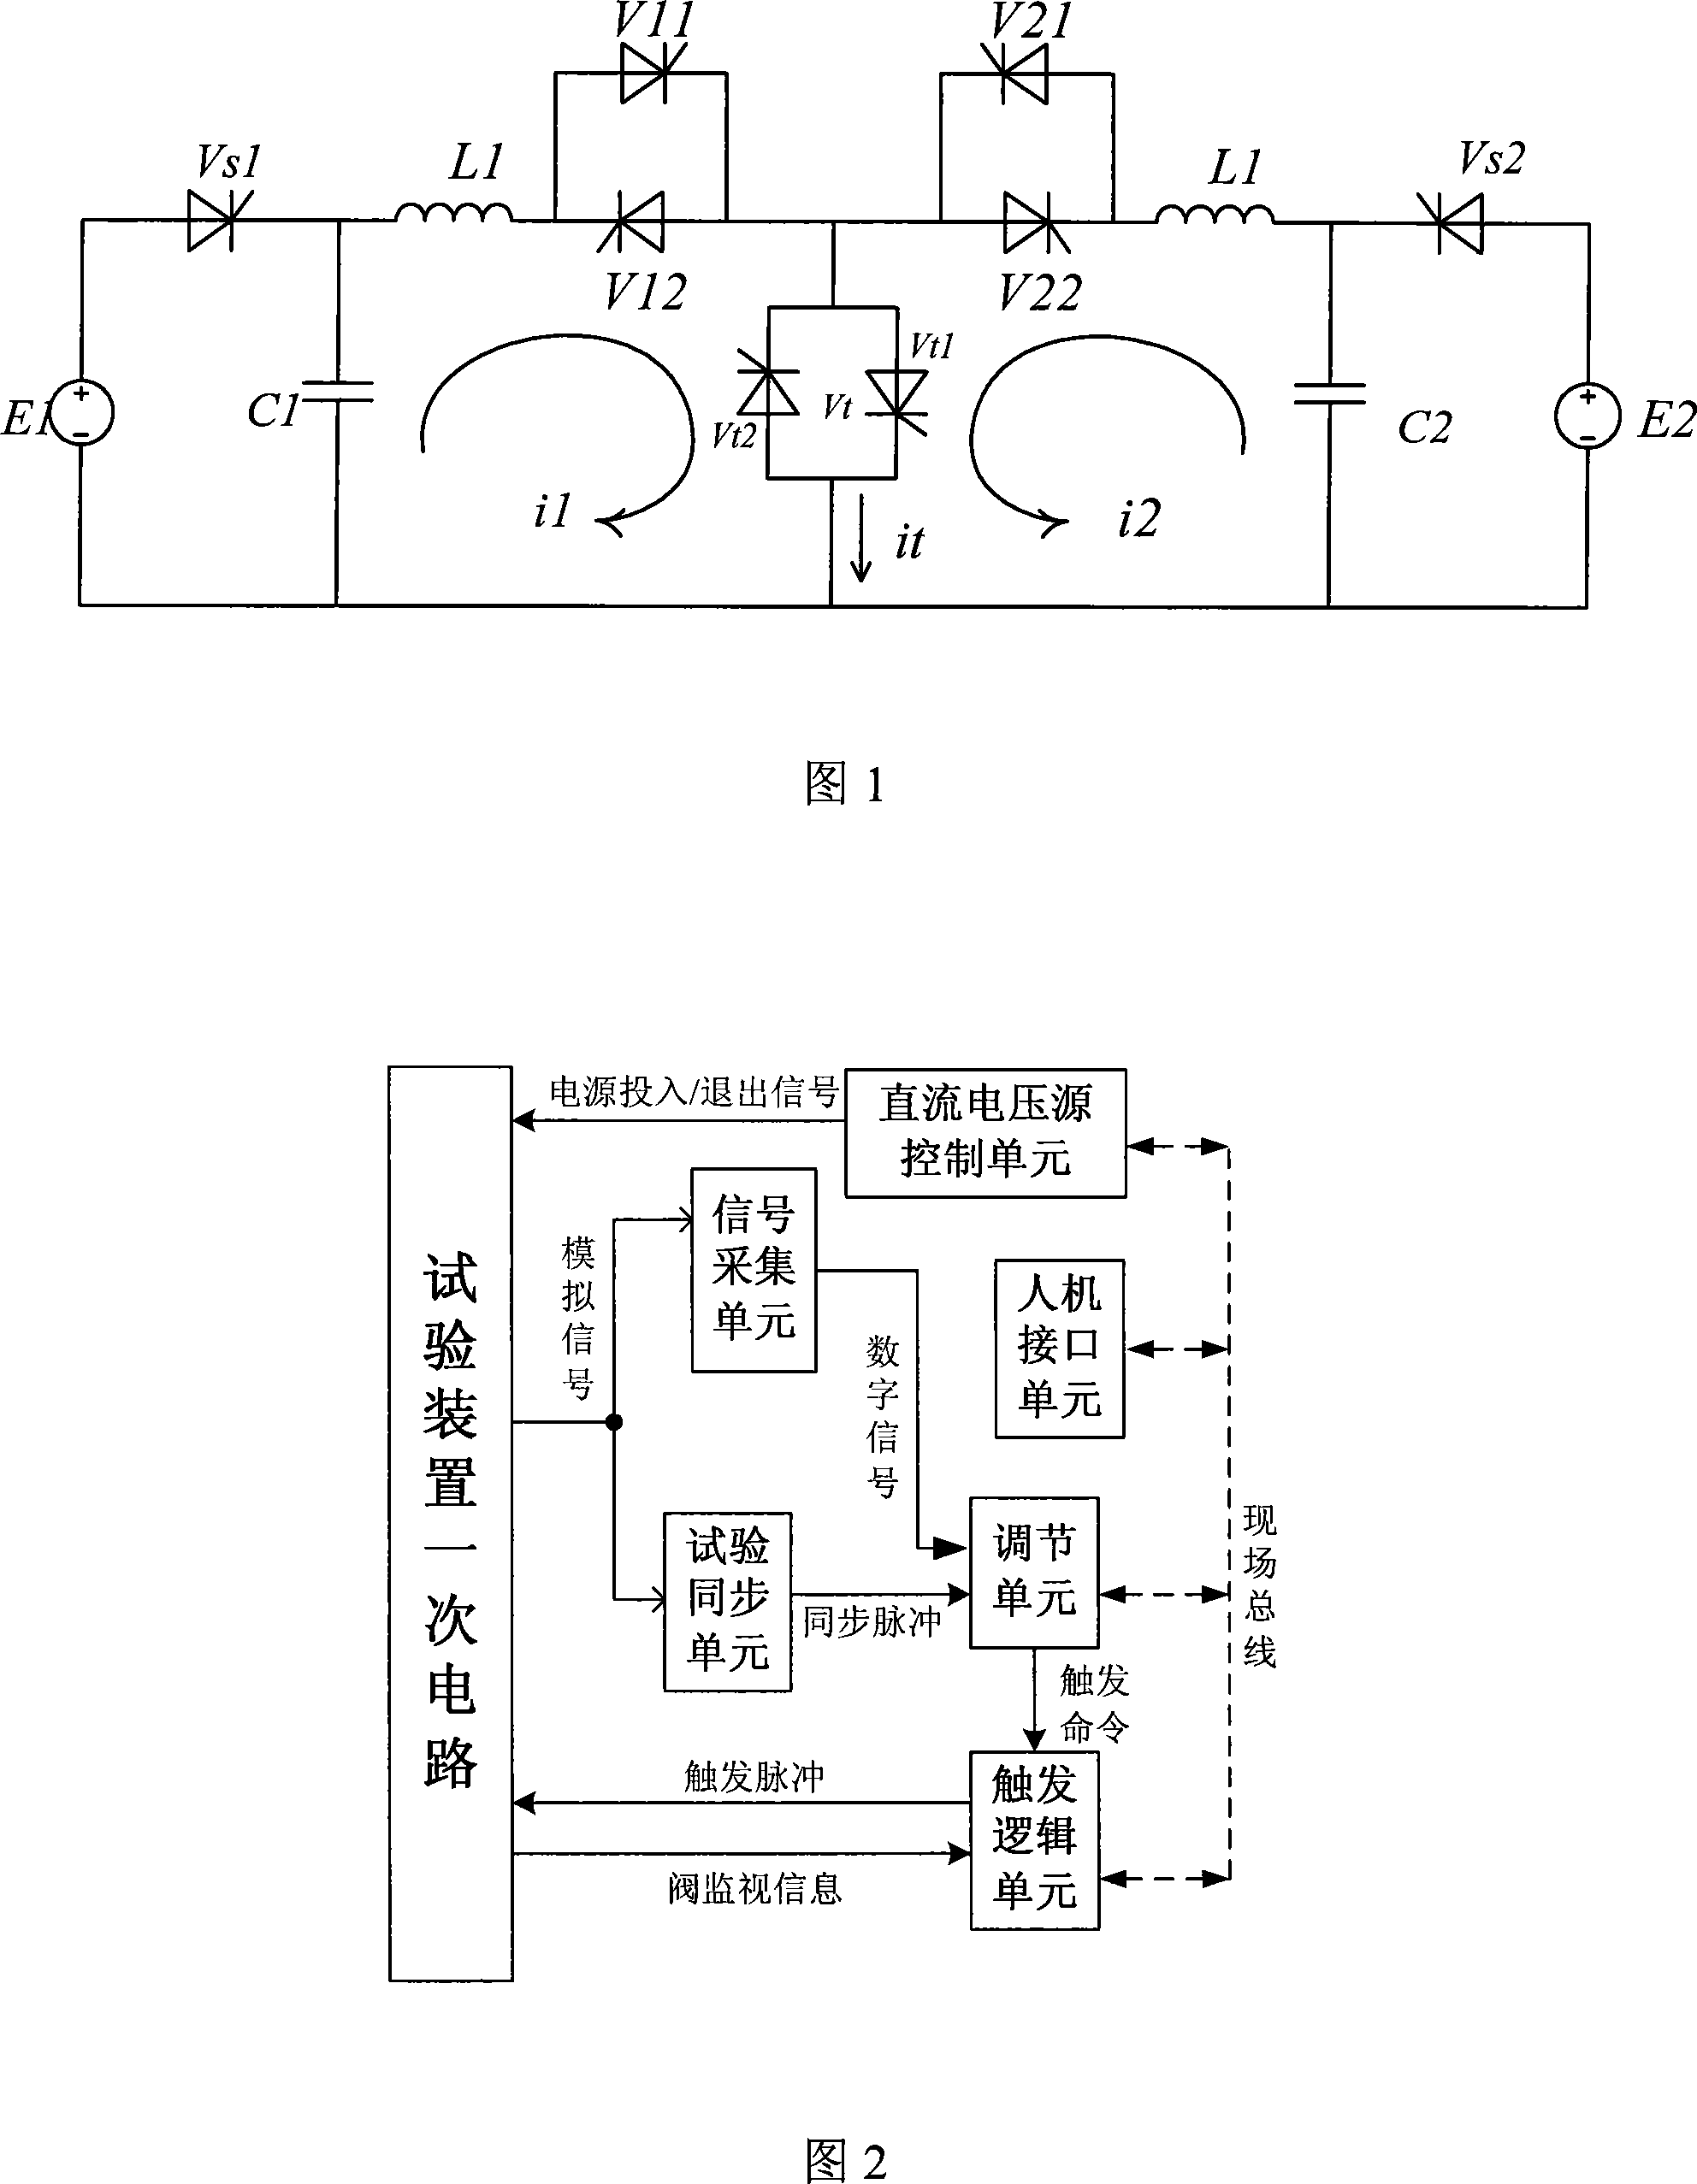 Thyristor switched capacitor high voltage valve test device and method